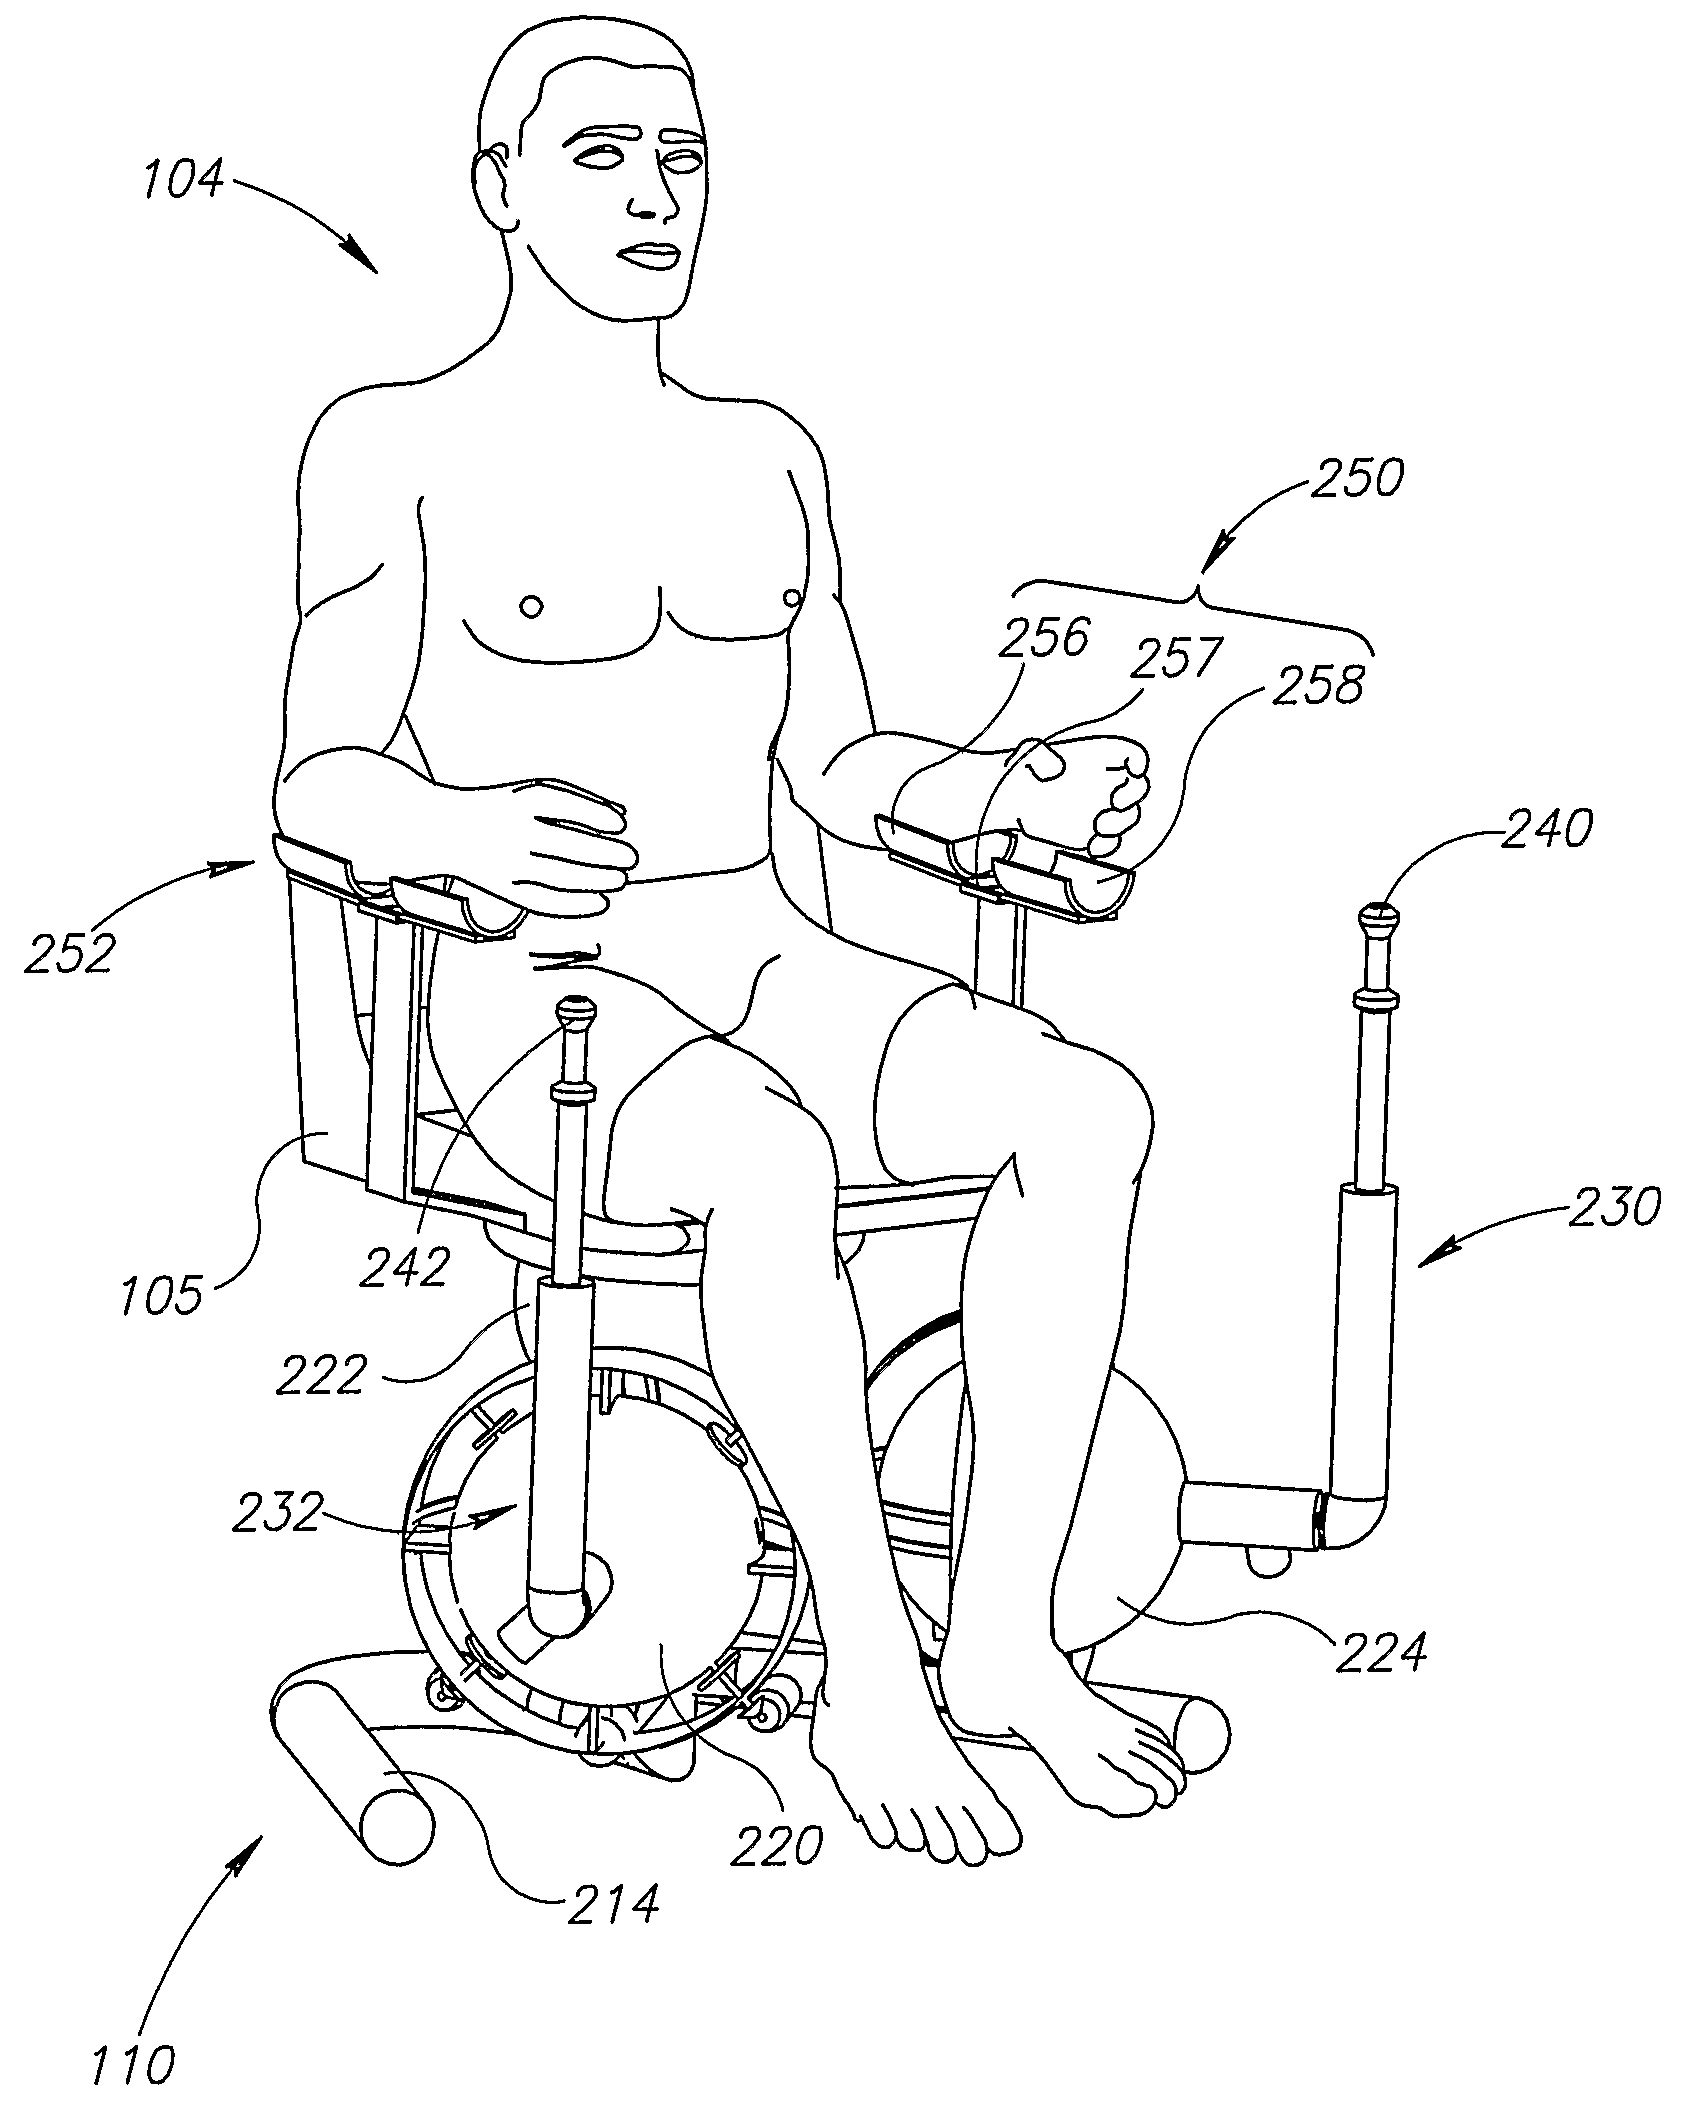 Methods and Apparatuses for Rehabilitation Exercise and Training